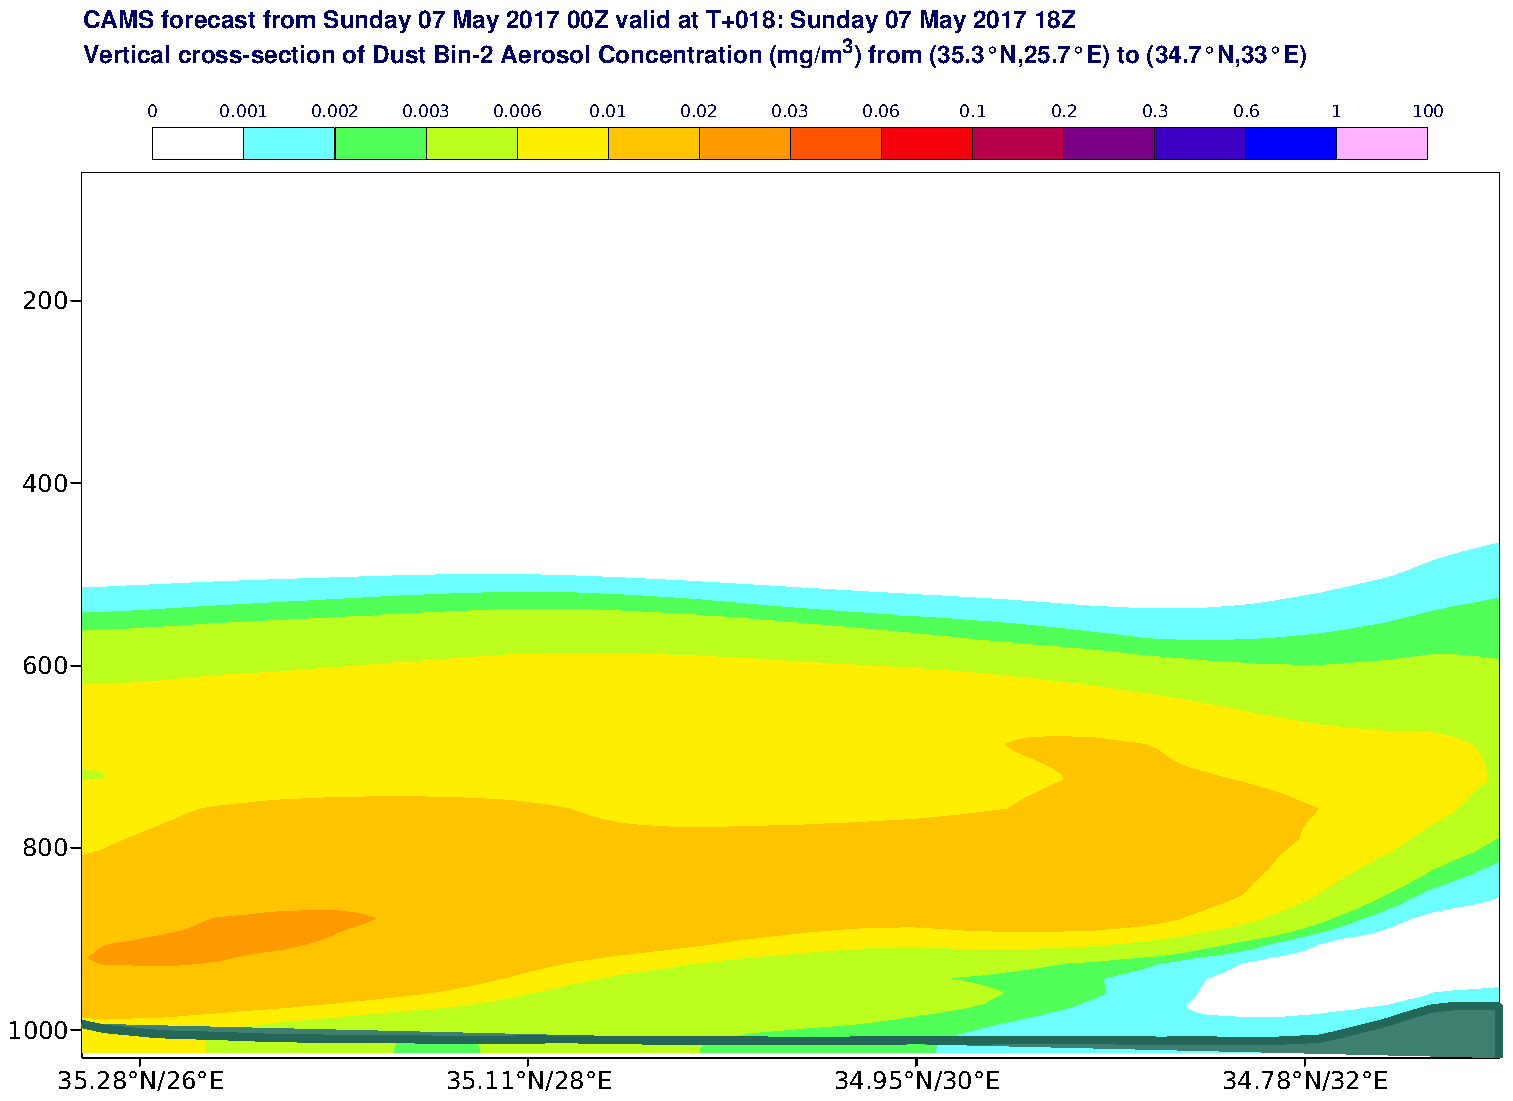 Vertical cross-section of Dust Bin-2 Aerosol Concentration (mg/m3) valid at T18 - 2017-05-07 18:00